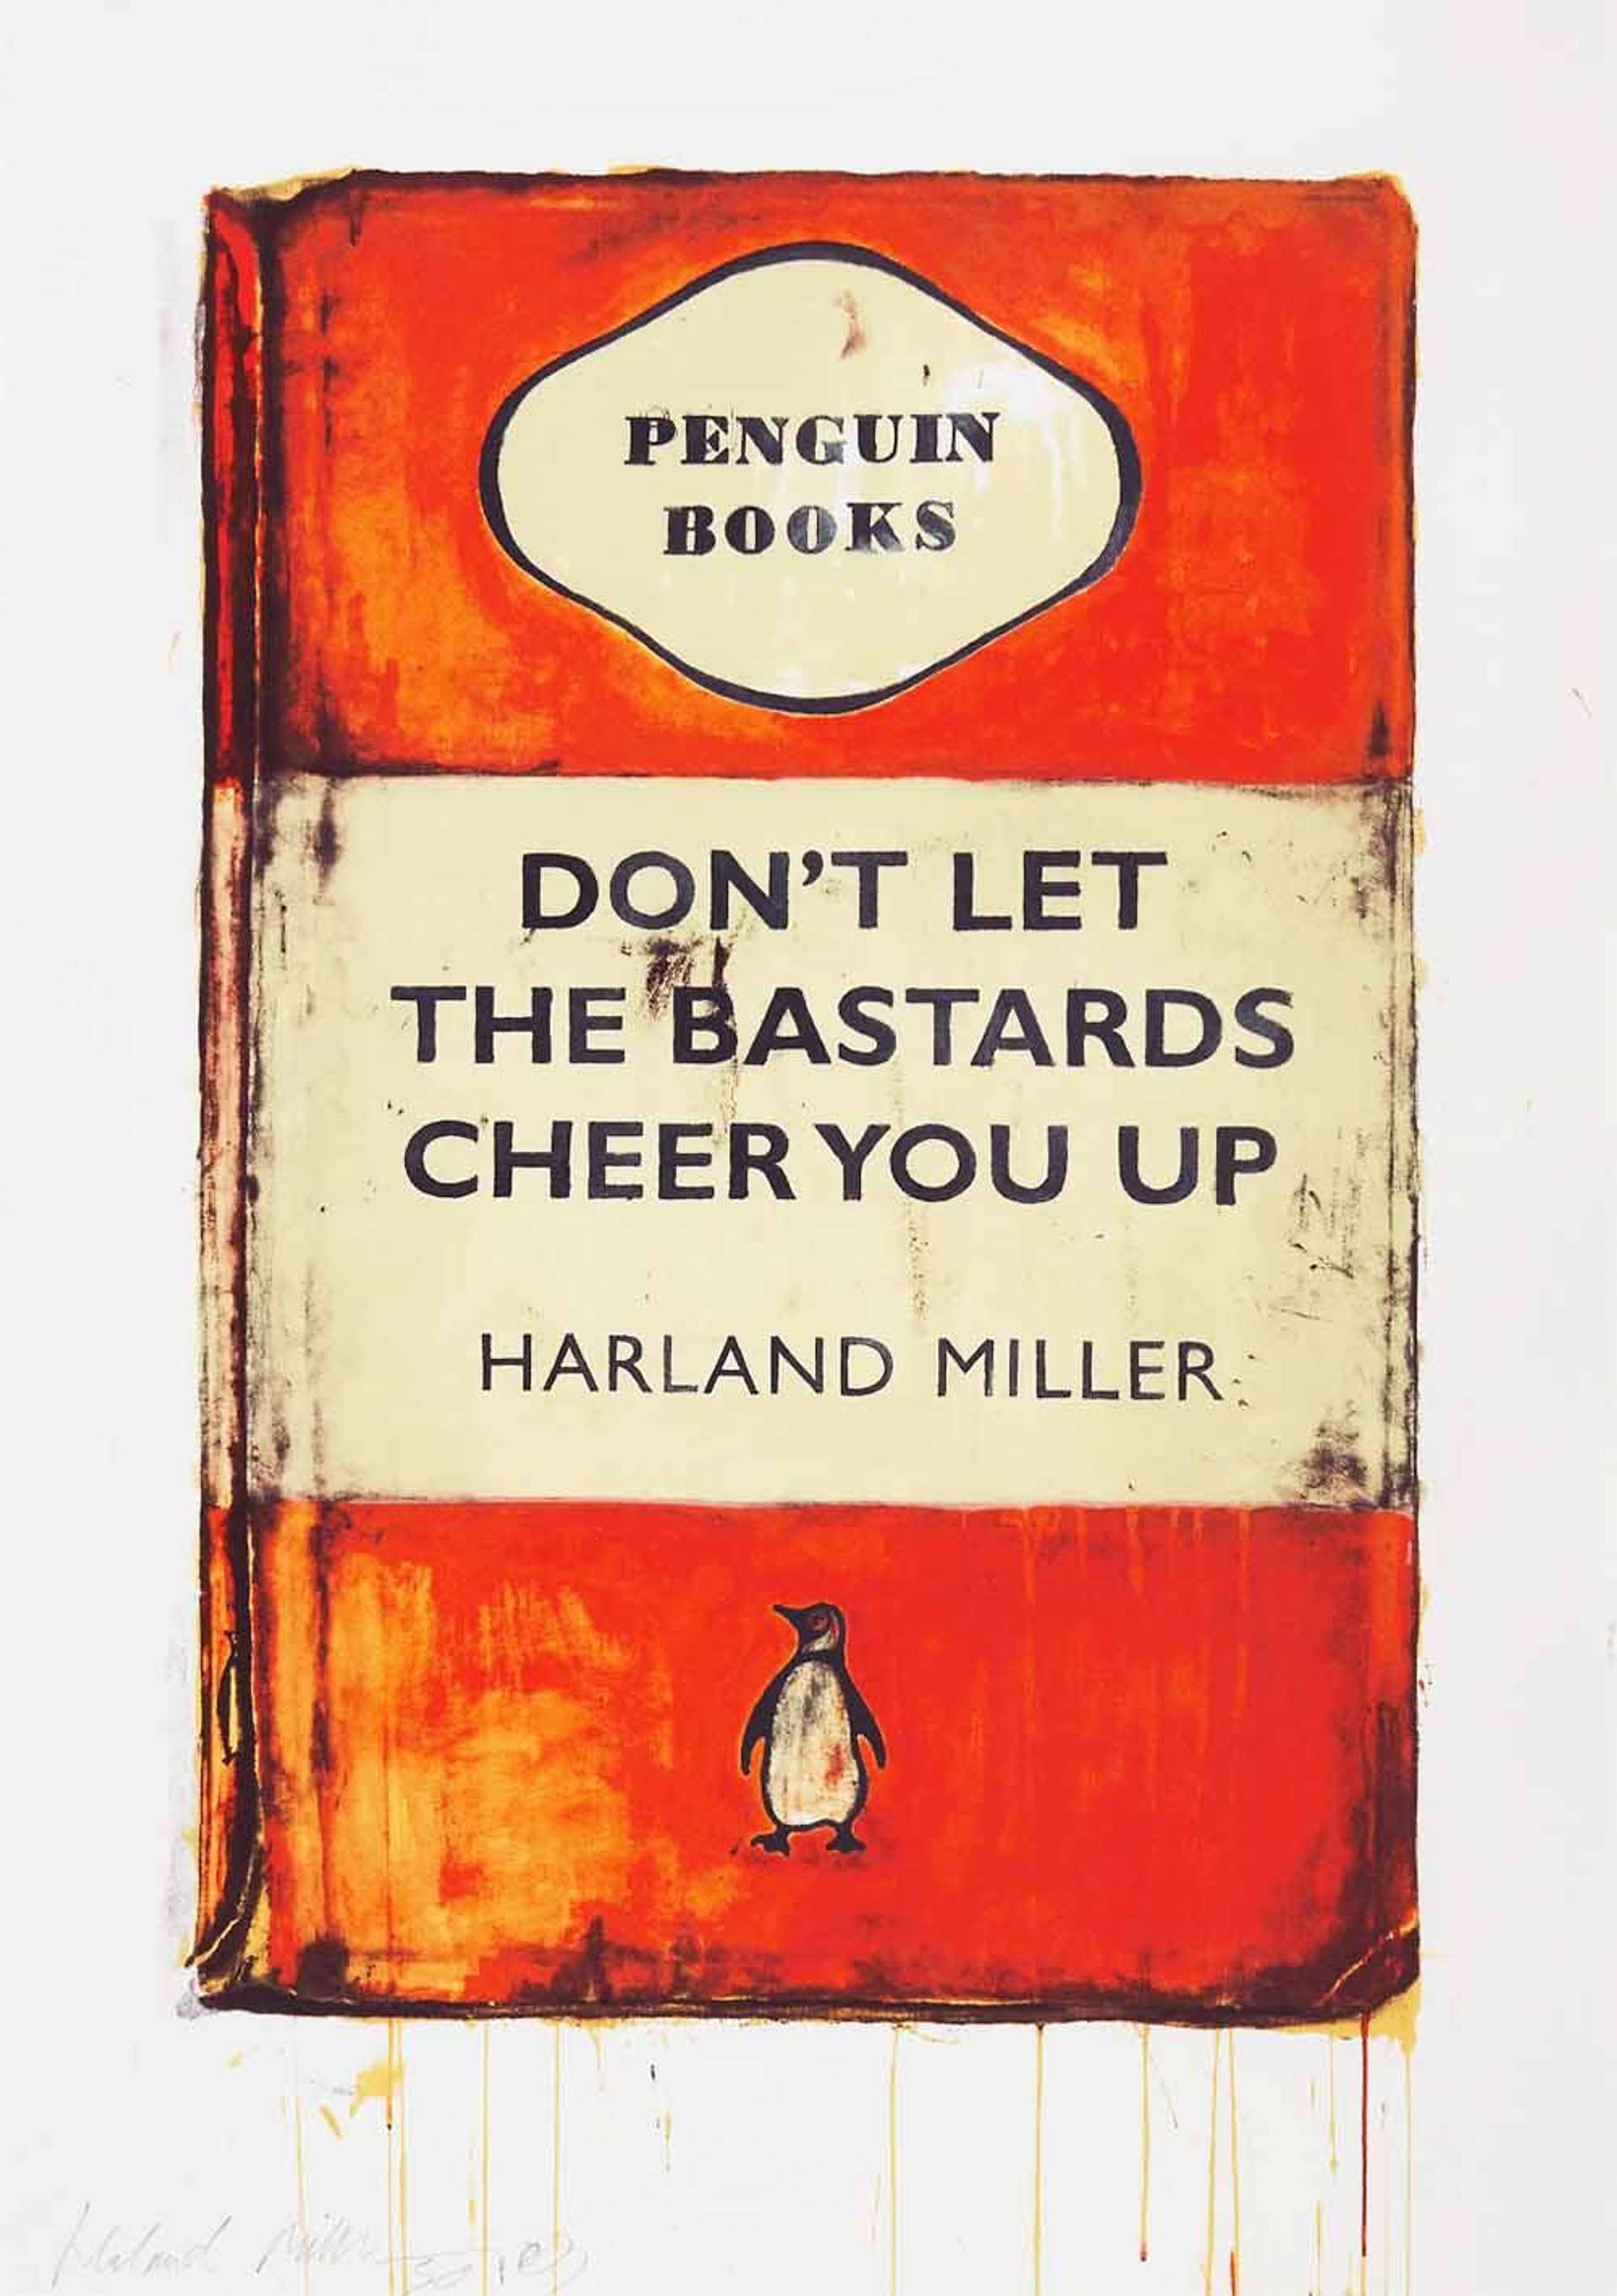 Harland Miller: More than Words, More than Image